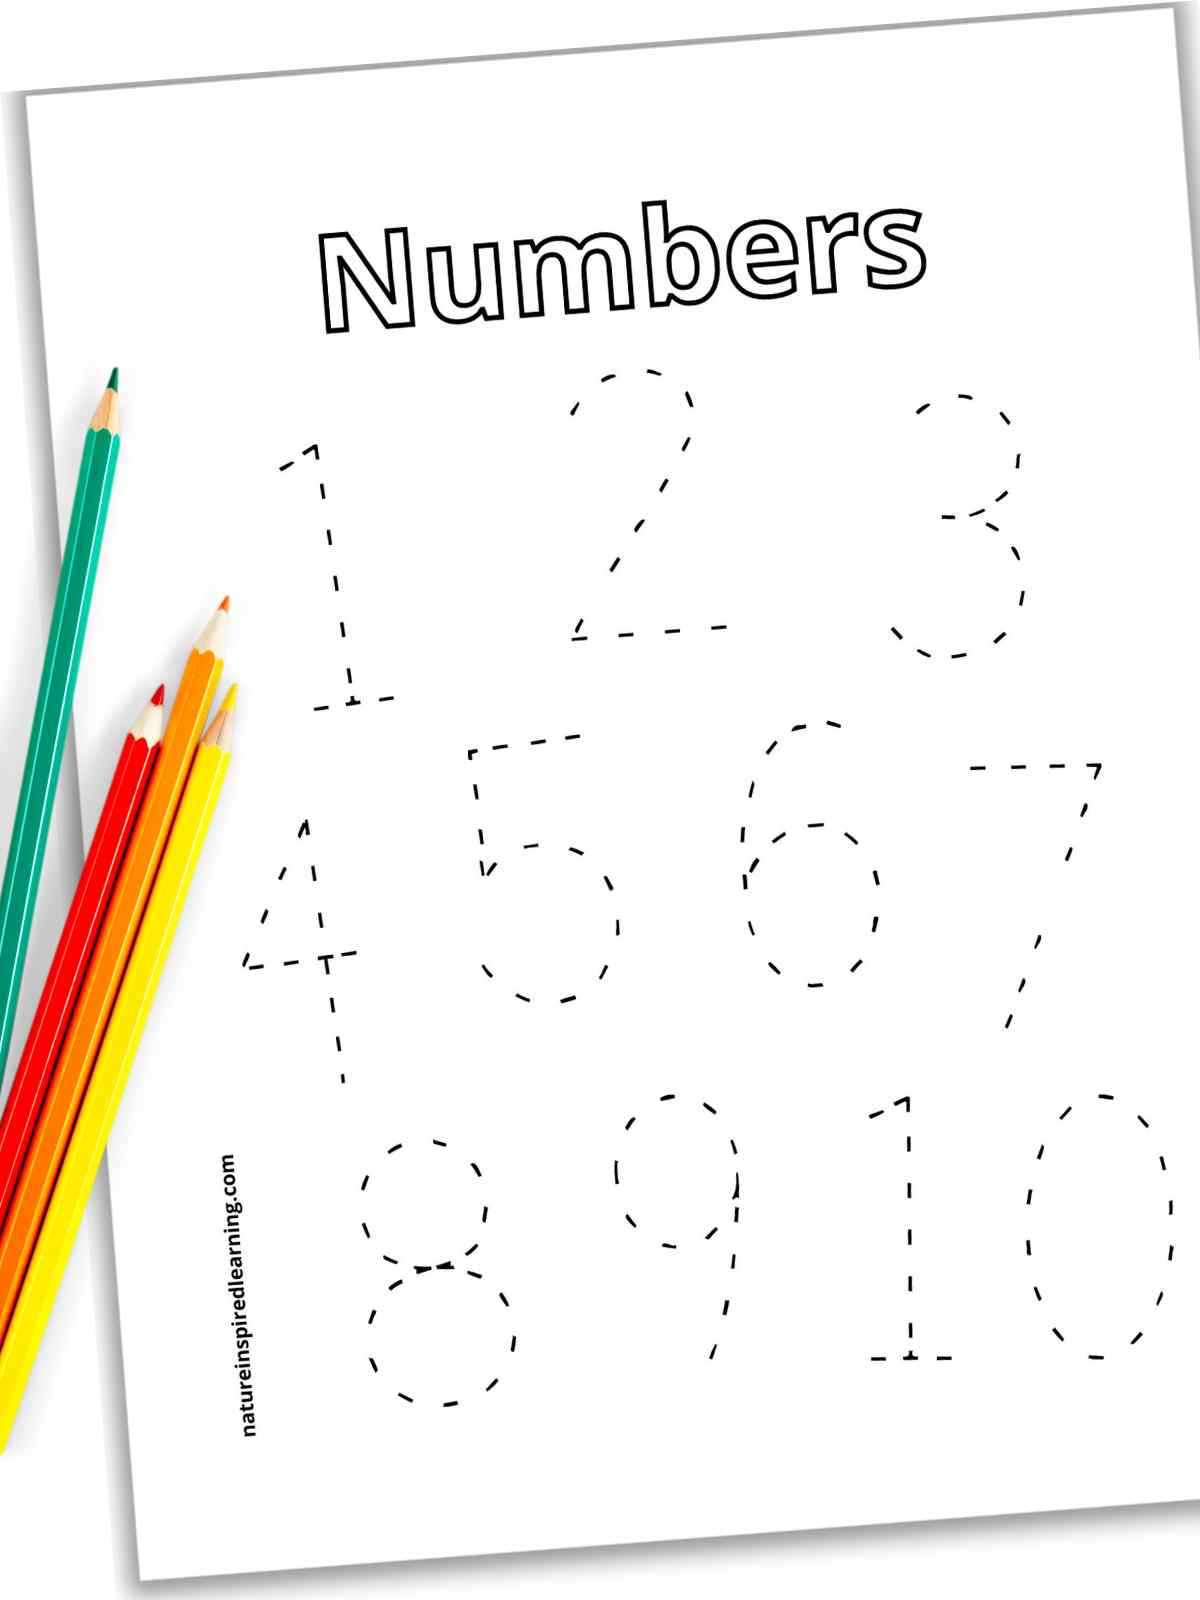 Black and white worksheet with Numbers across the top in outline form with numbers 1-10 in a large traceable font on the sheet with four bright colored pencils on top of the left side.